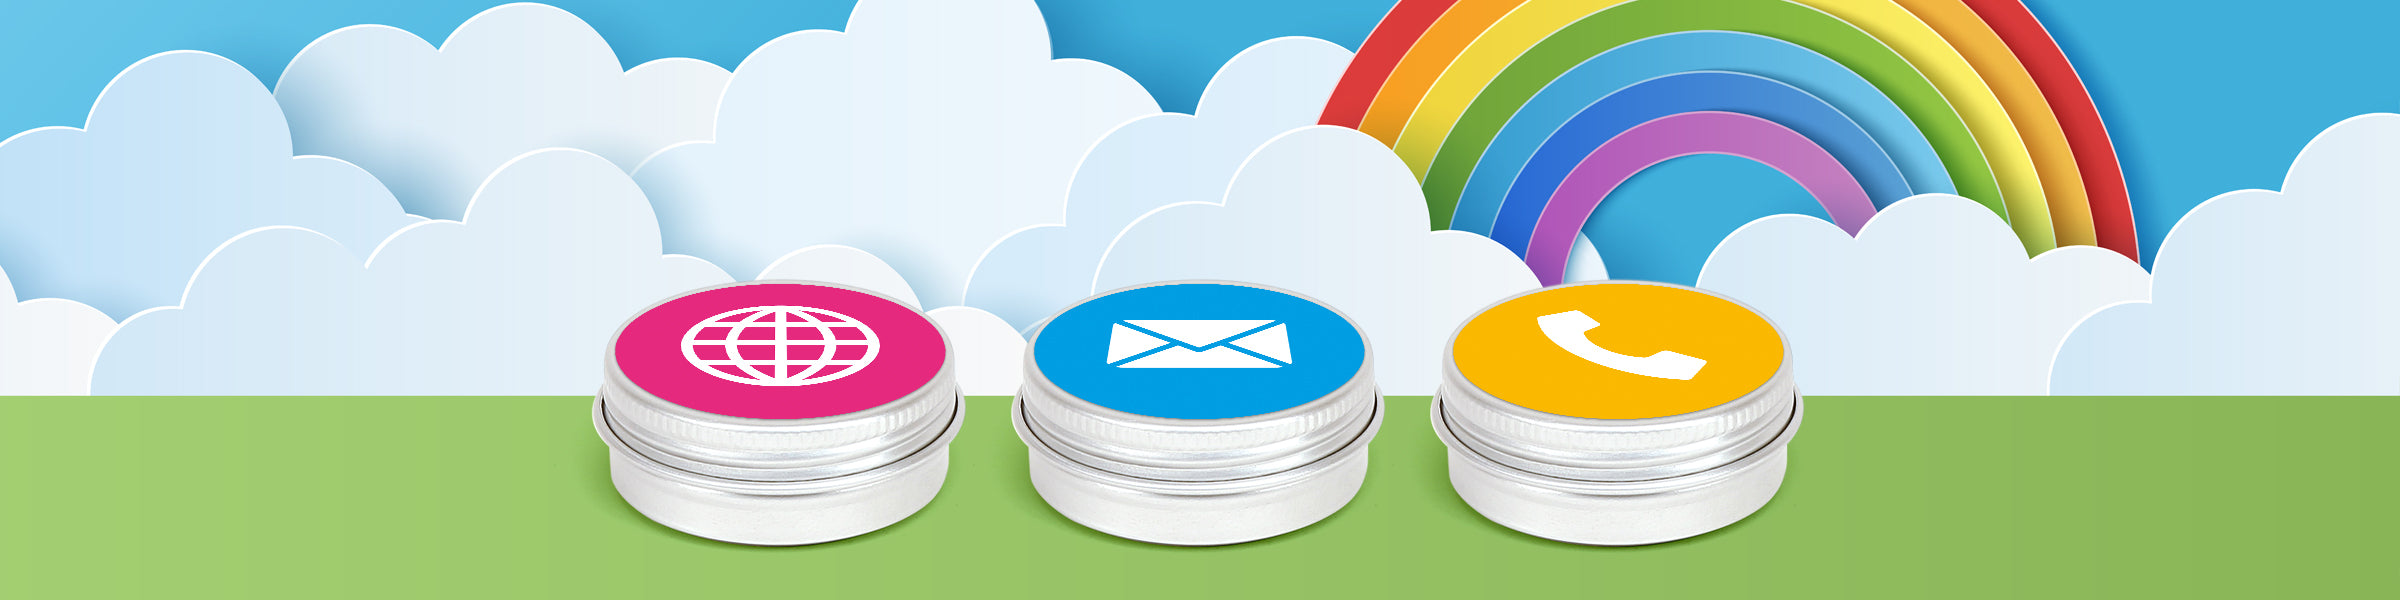 Cartoon tins with rainbow in the background showcasing symbols for connectivity. 